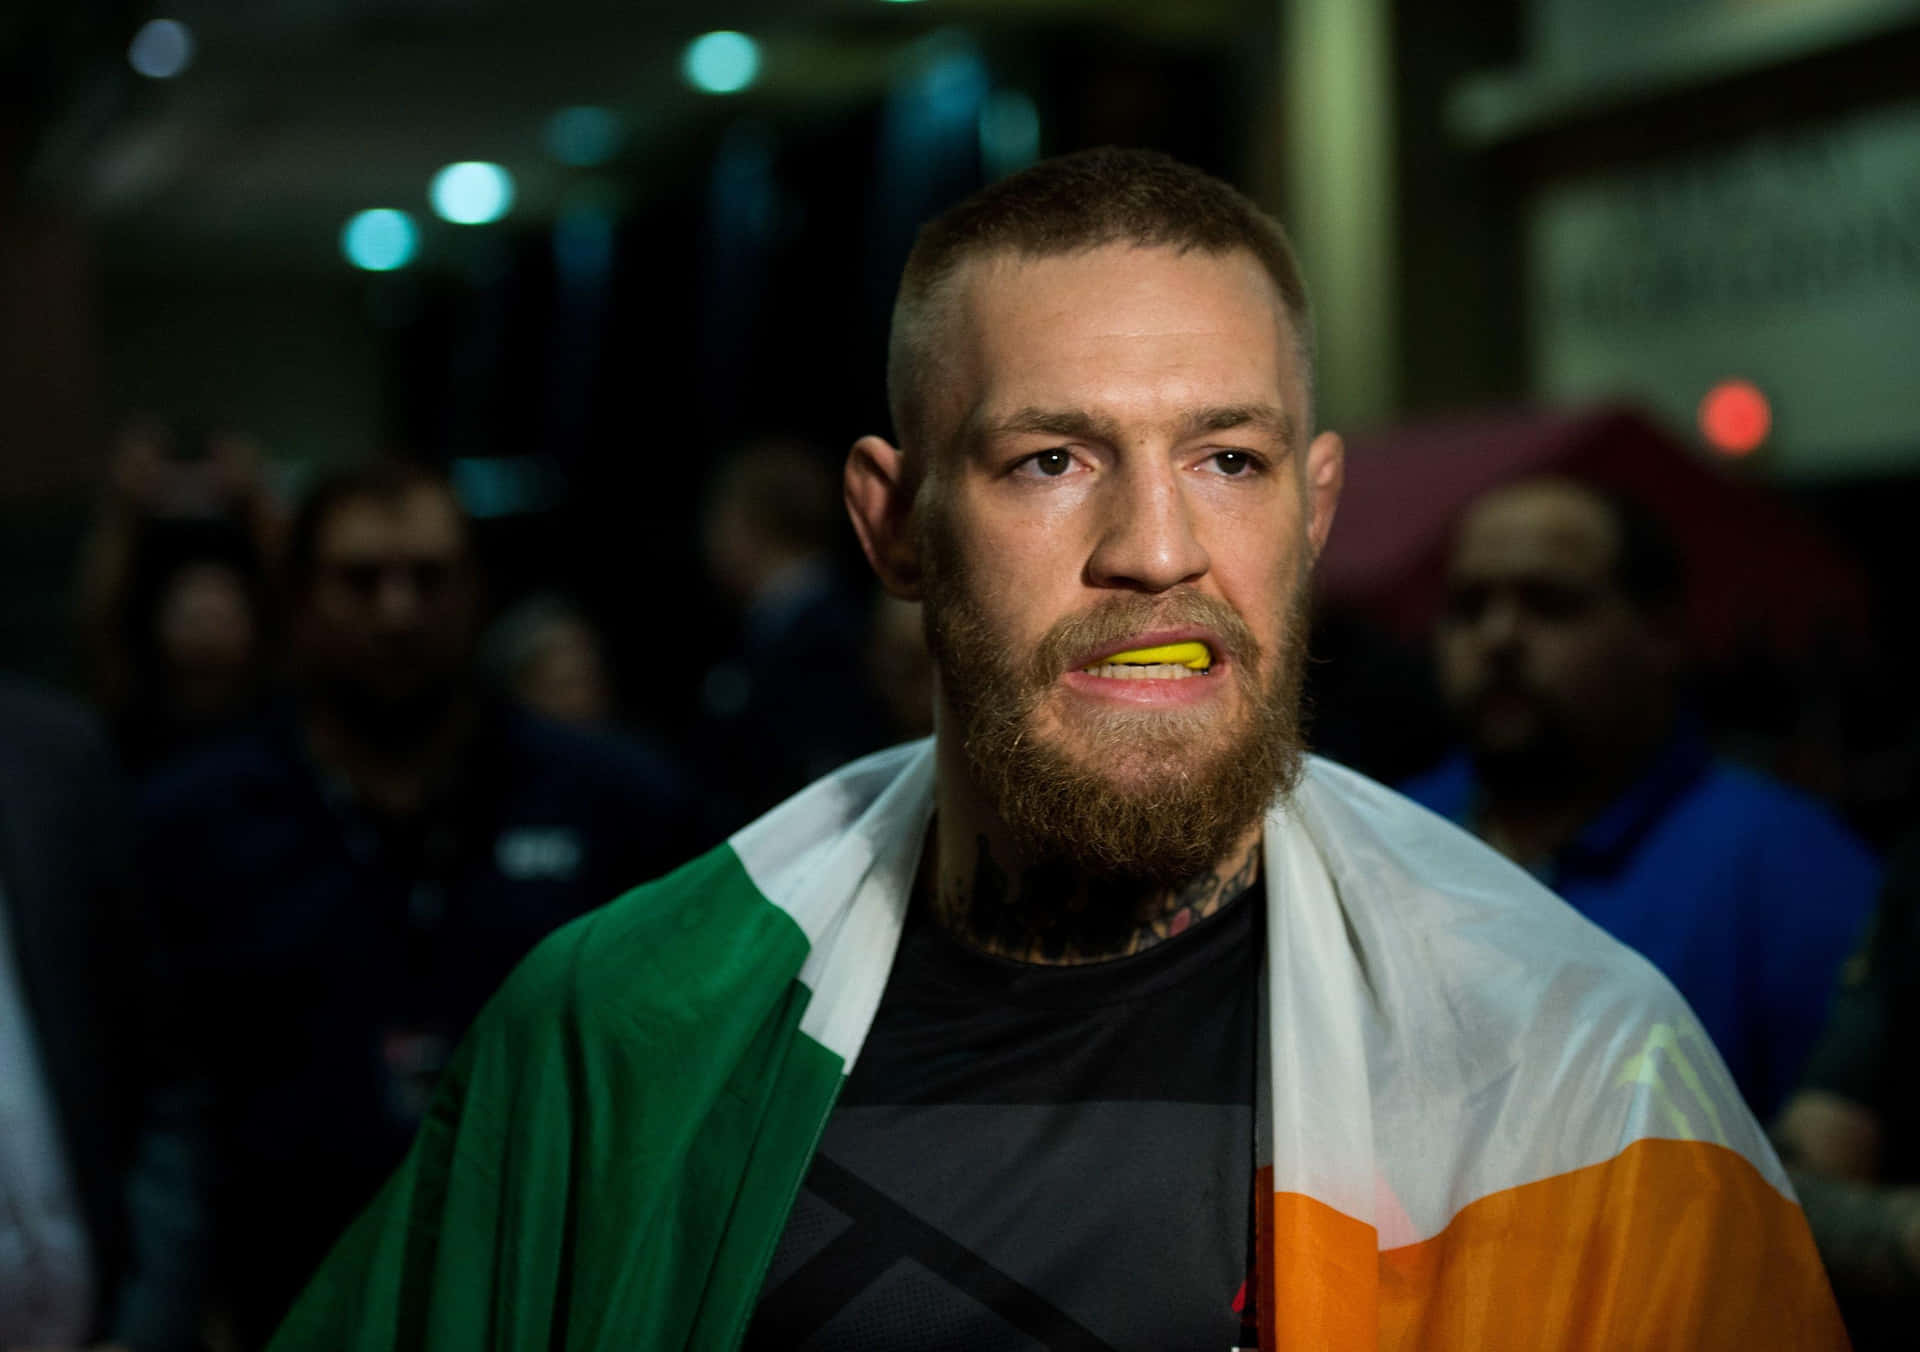 "Conor McGregor: From Rags to Riches"